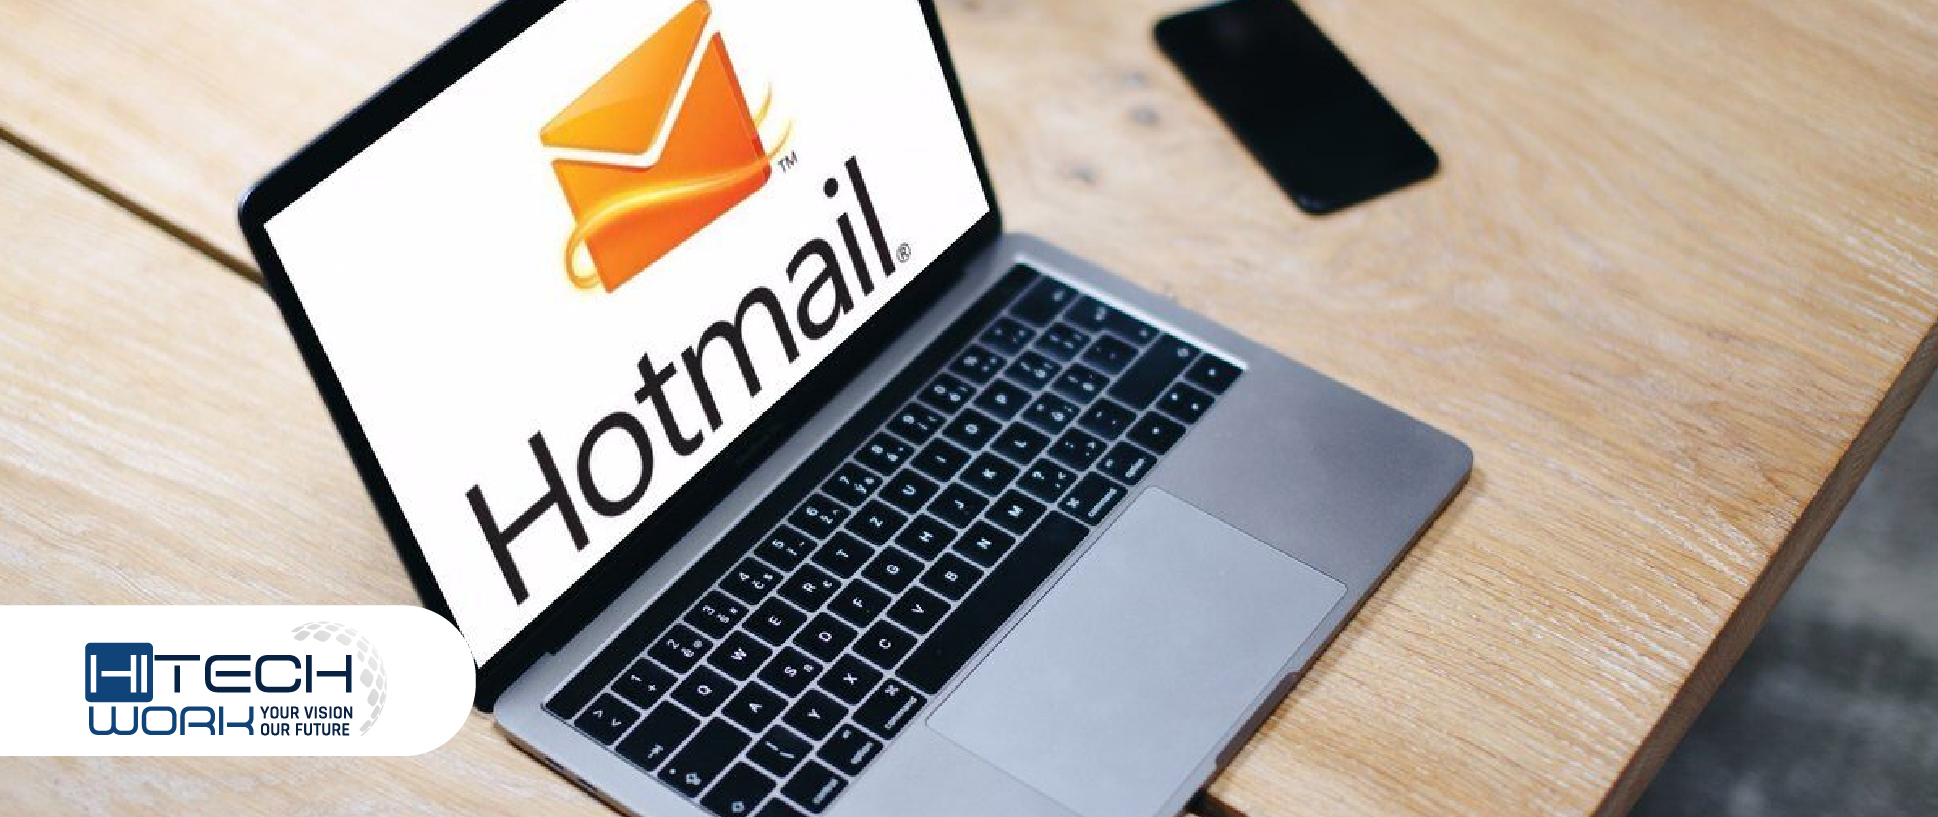 How to Solve Hotmail Problems on Mac